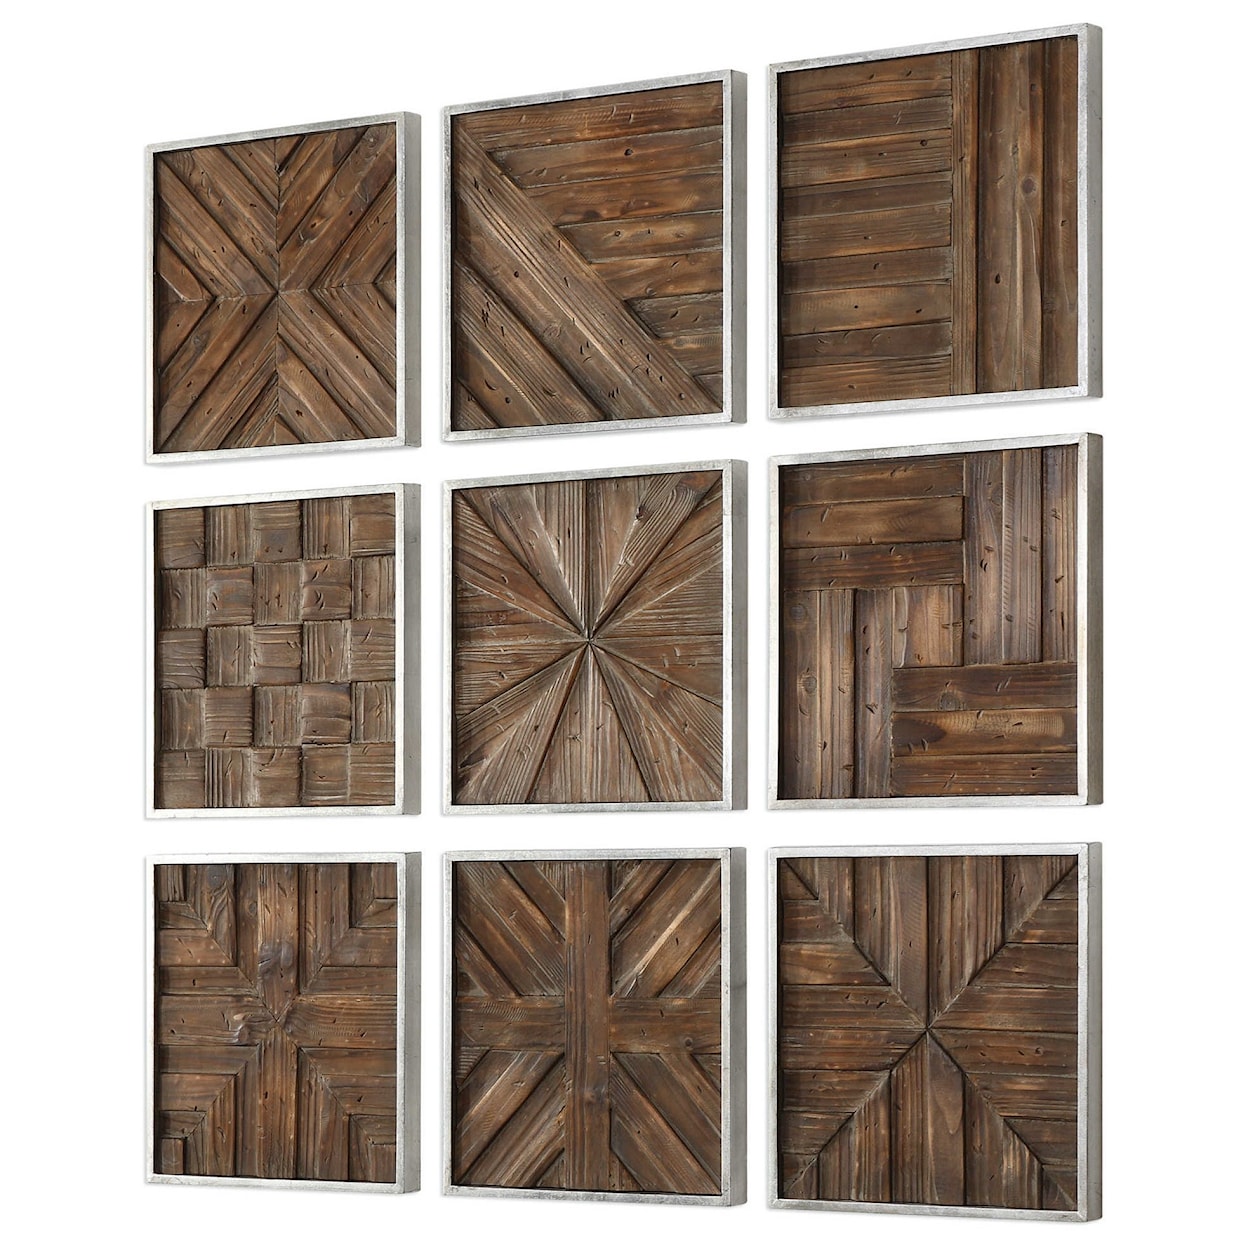 Uttermost Art Bryndle Rustic Wooden Squares Set of 9